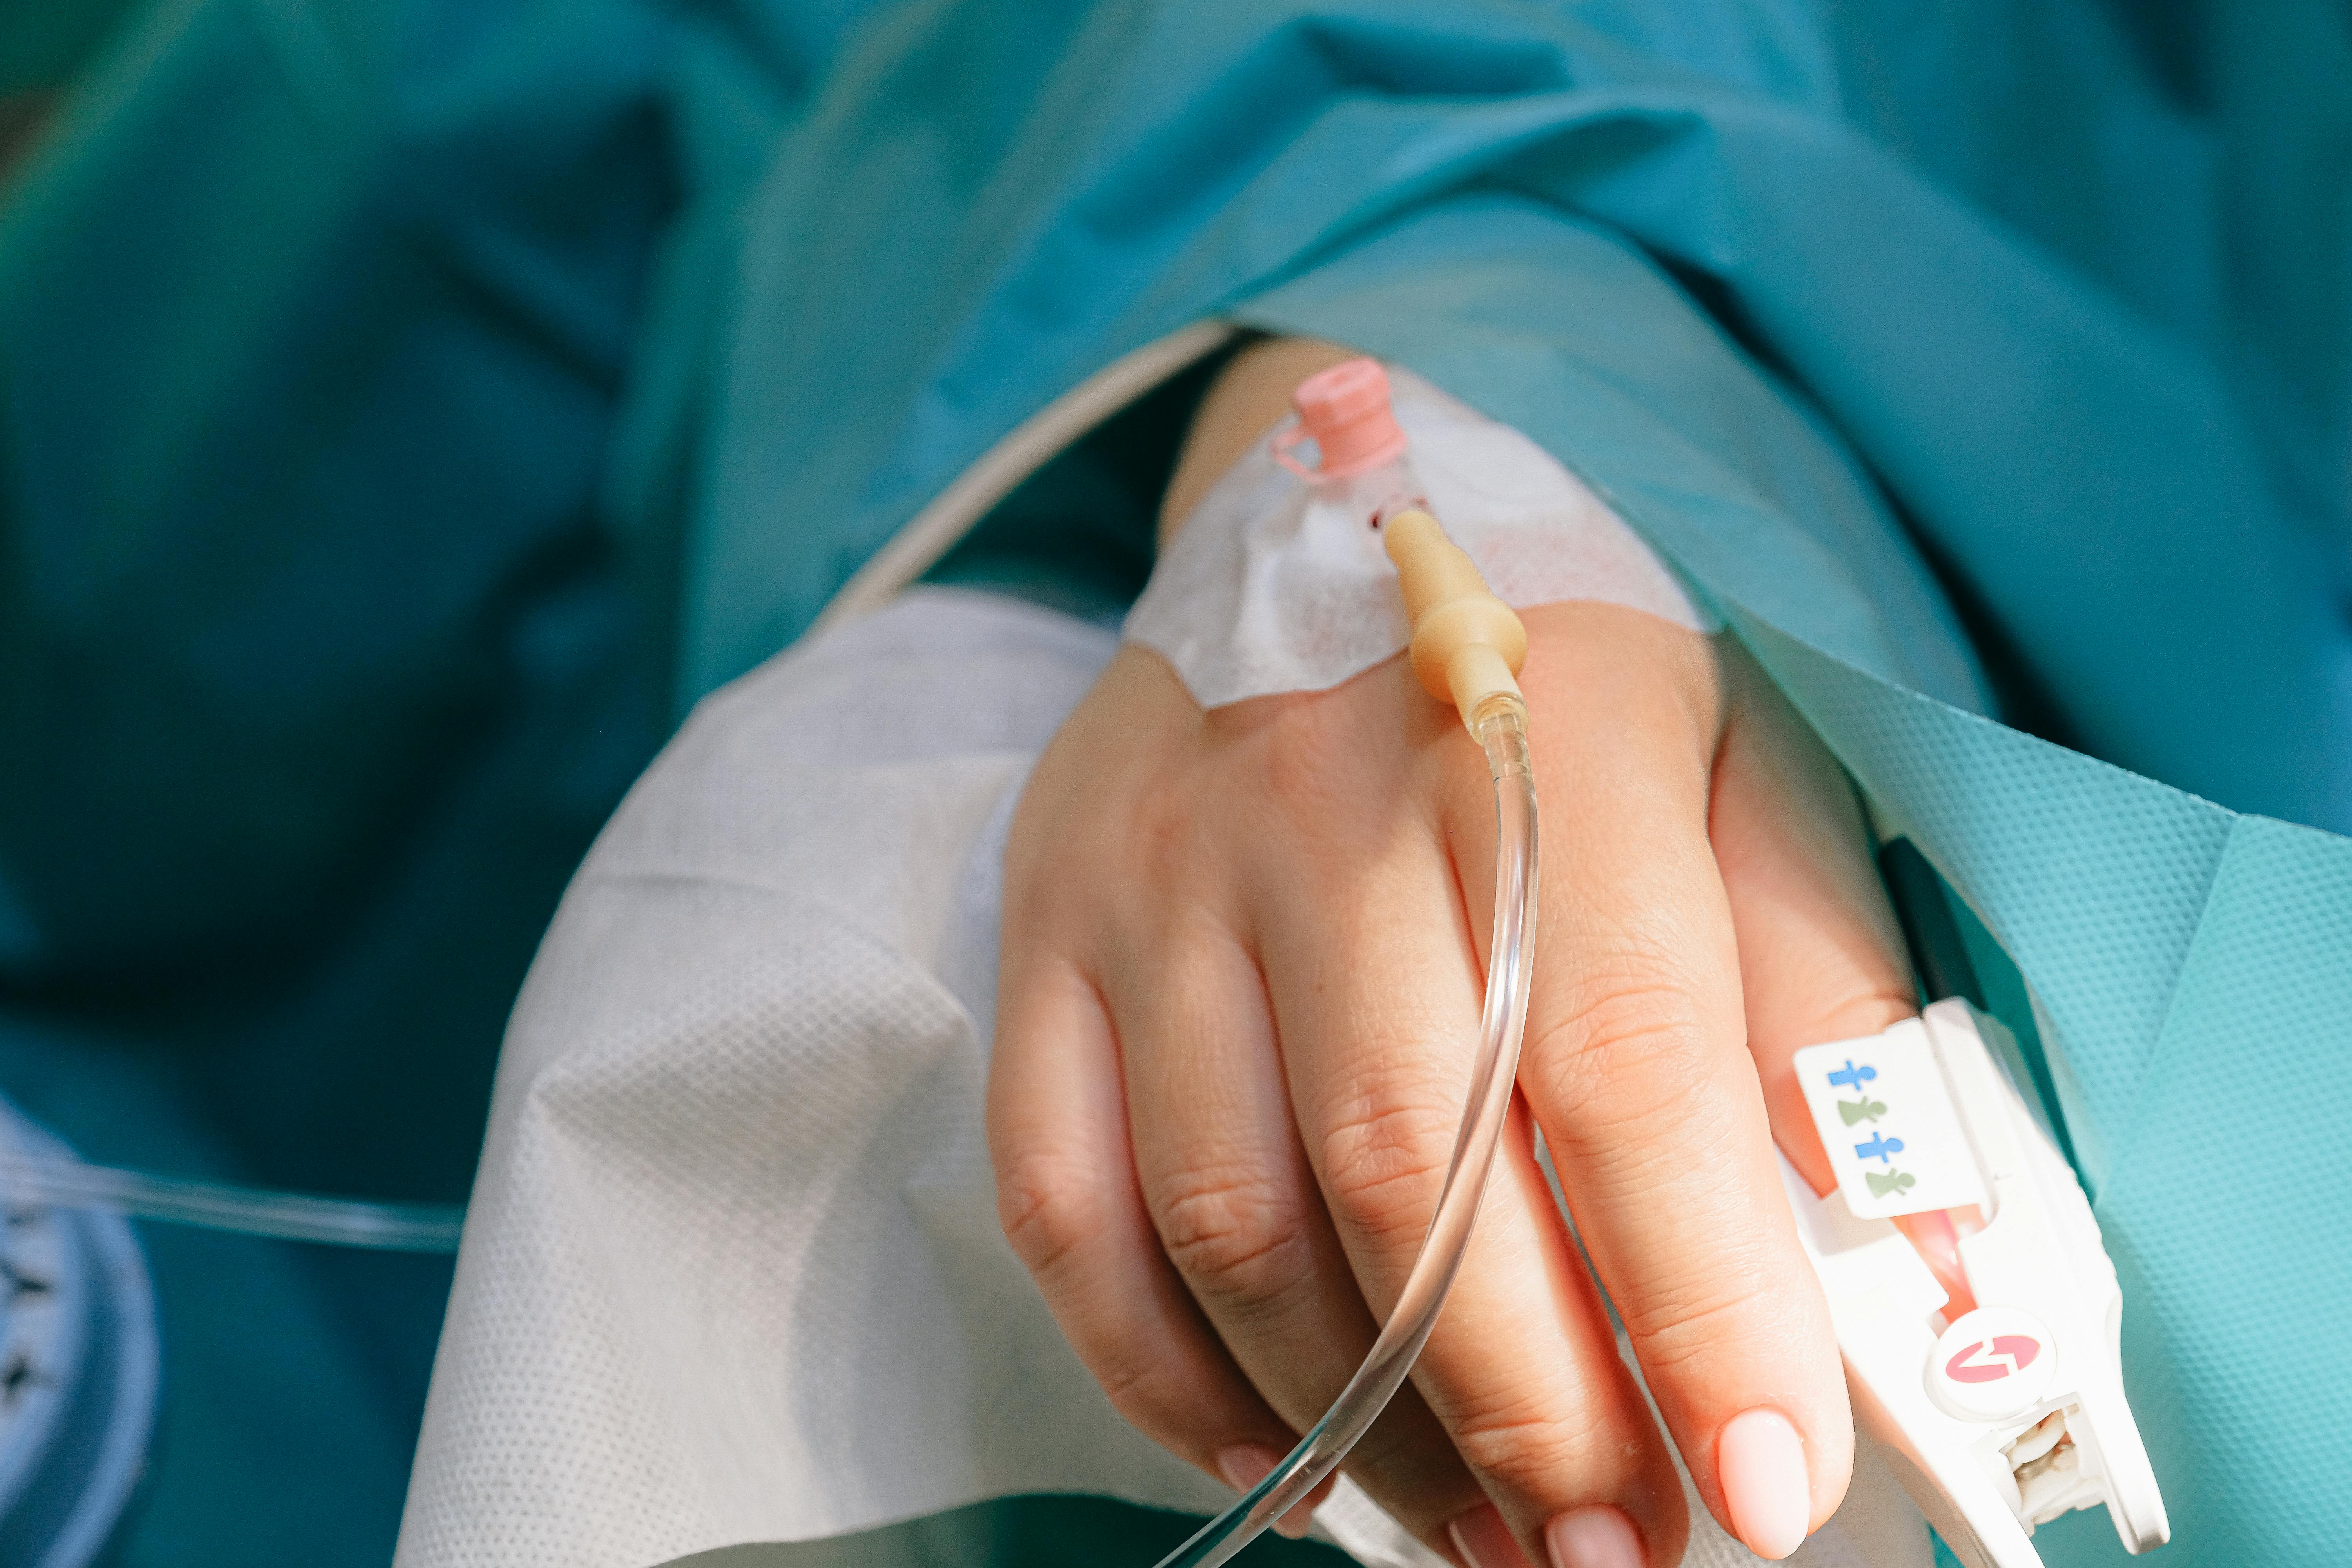 A woman's hand with a hospital drip | Source: Pexels